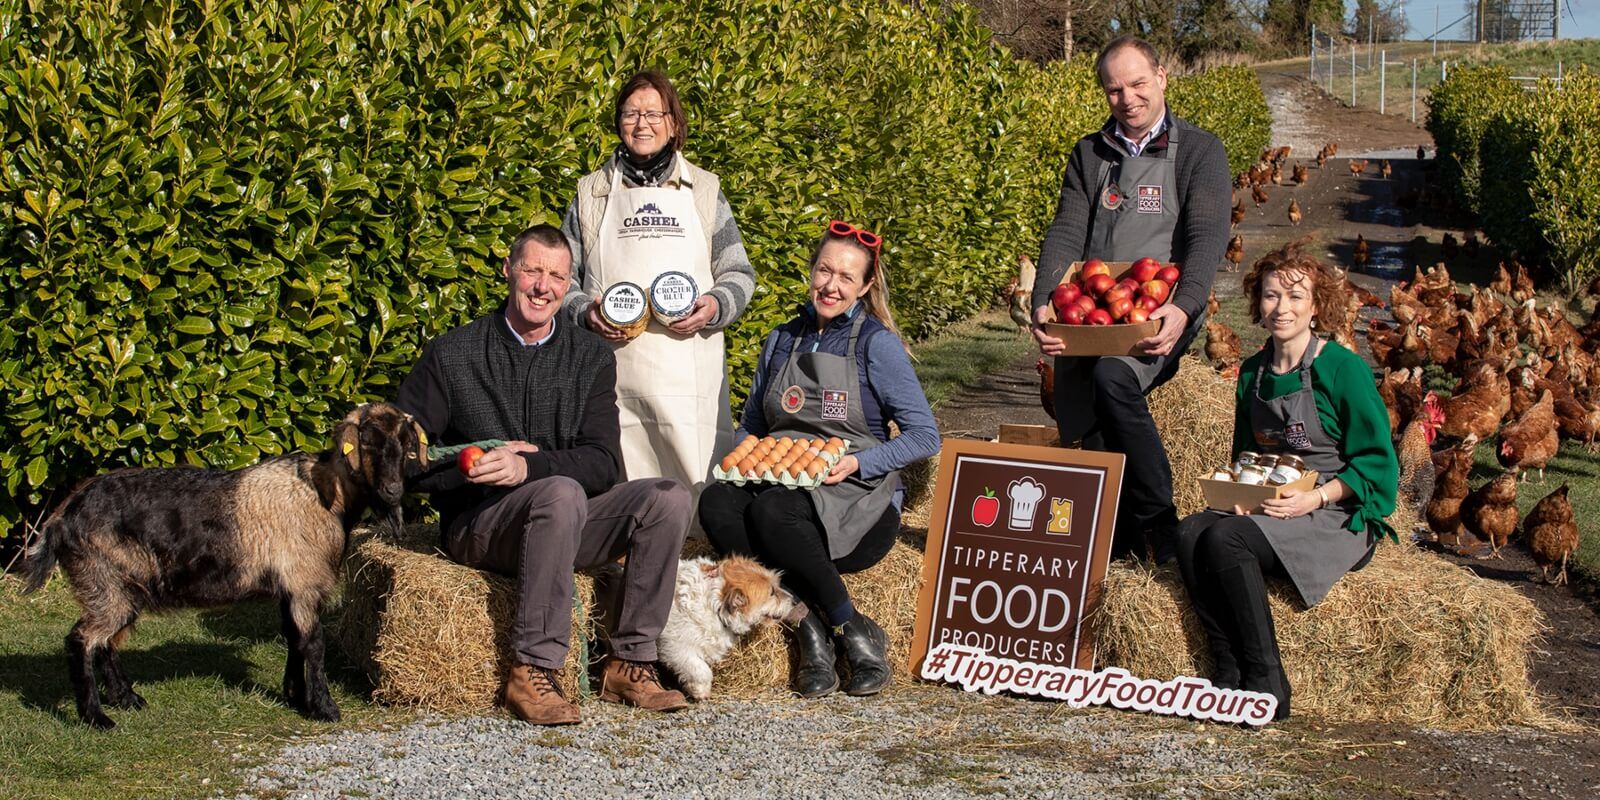 Tipperary Food Producers banner